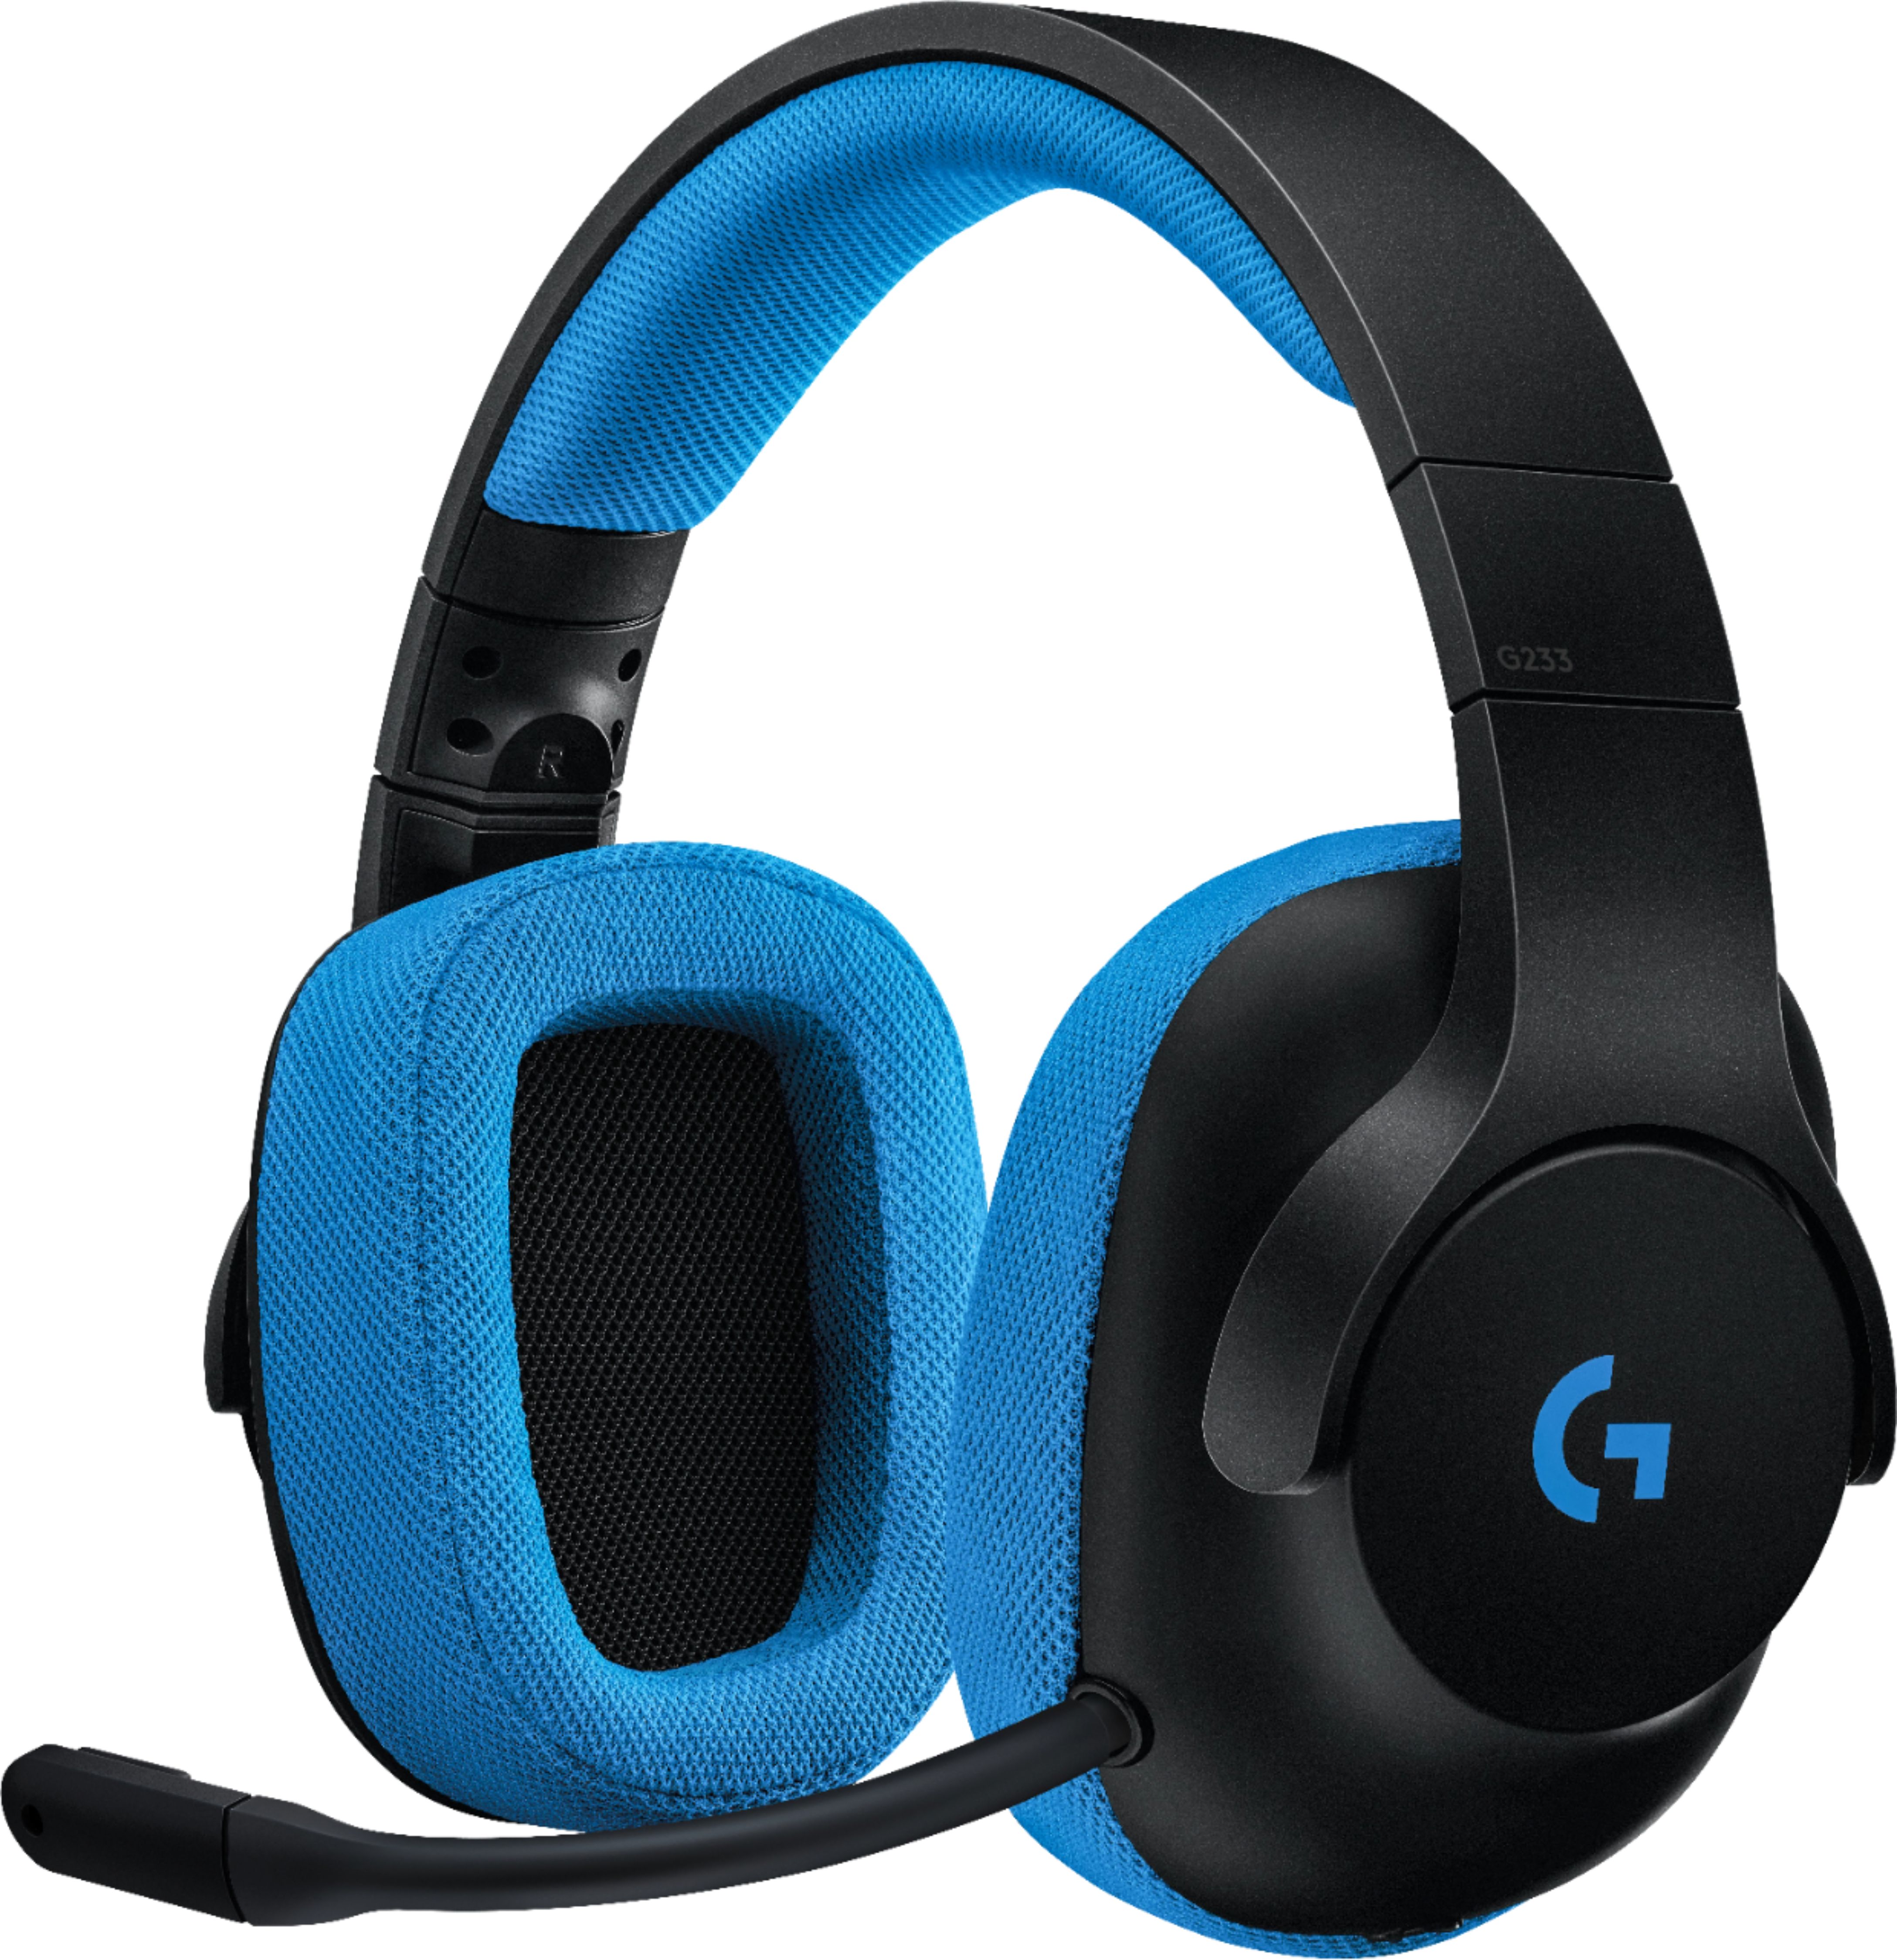 Eik Jood Inheems Logitech G233 Prodigy Wired Gaming Headset for PC, PS4, Xbox One Blue/black  981-000701 - Best Buy